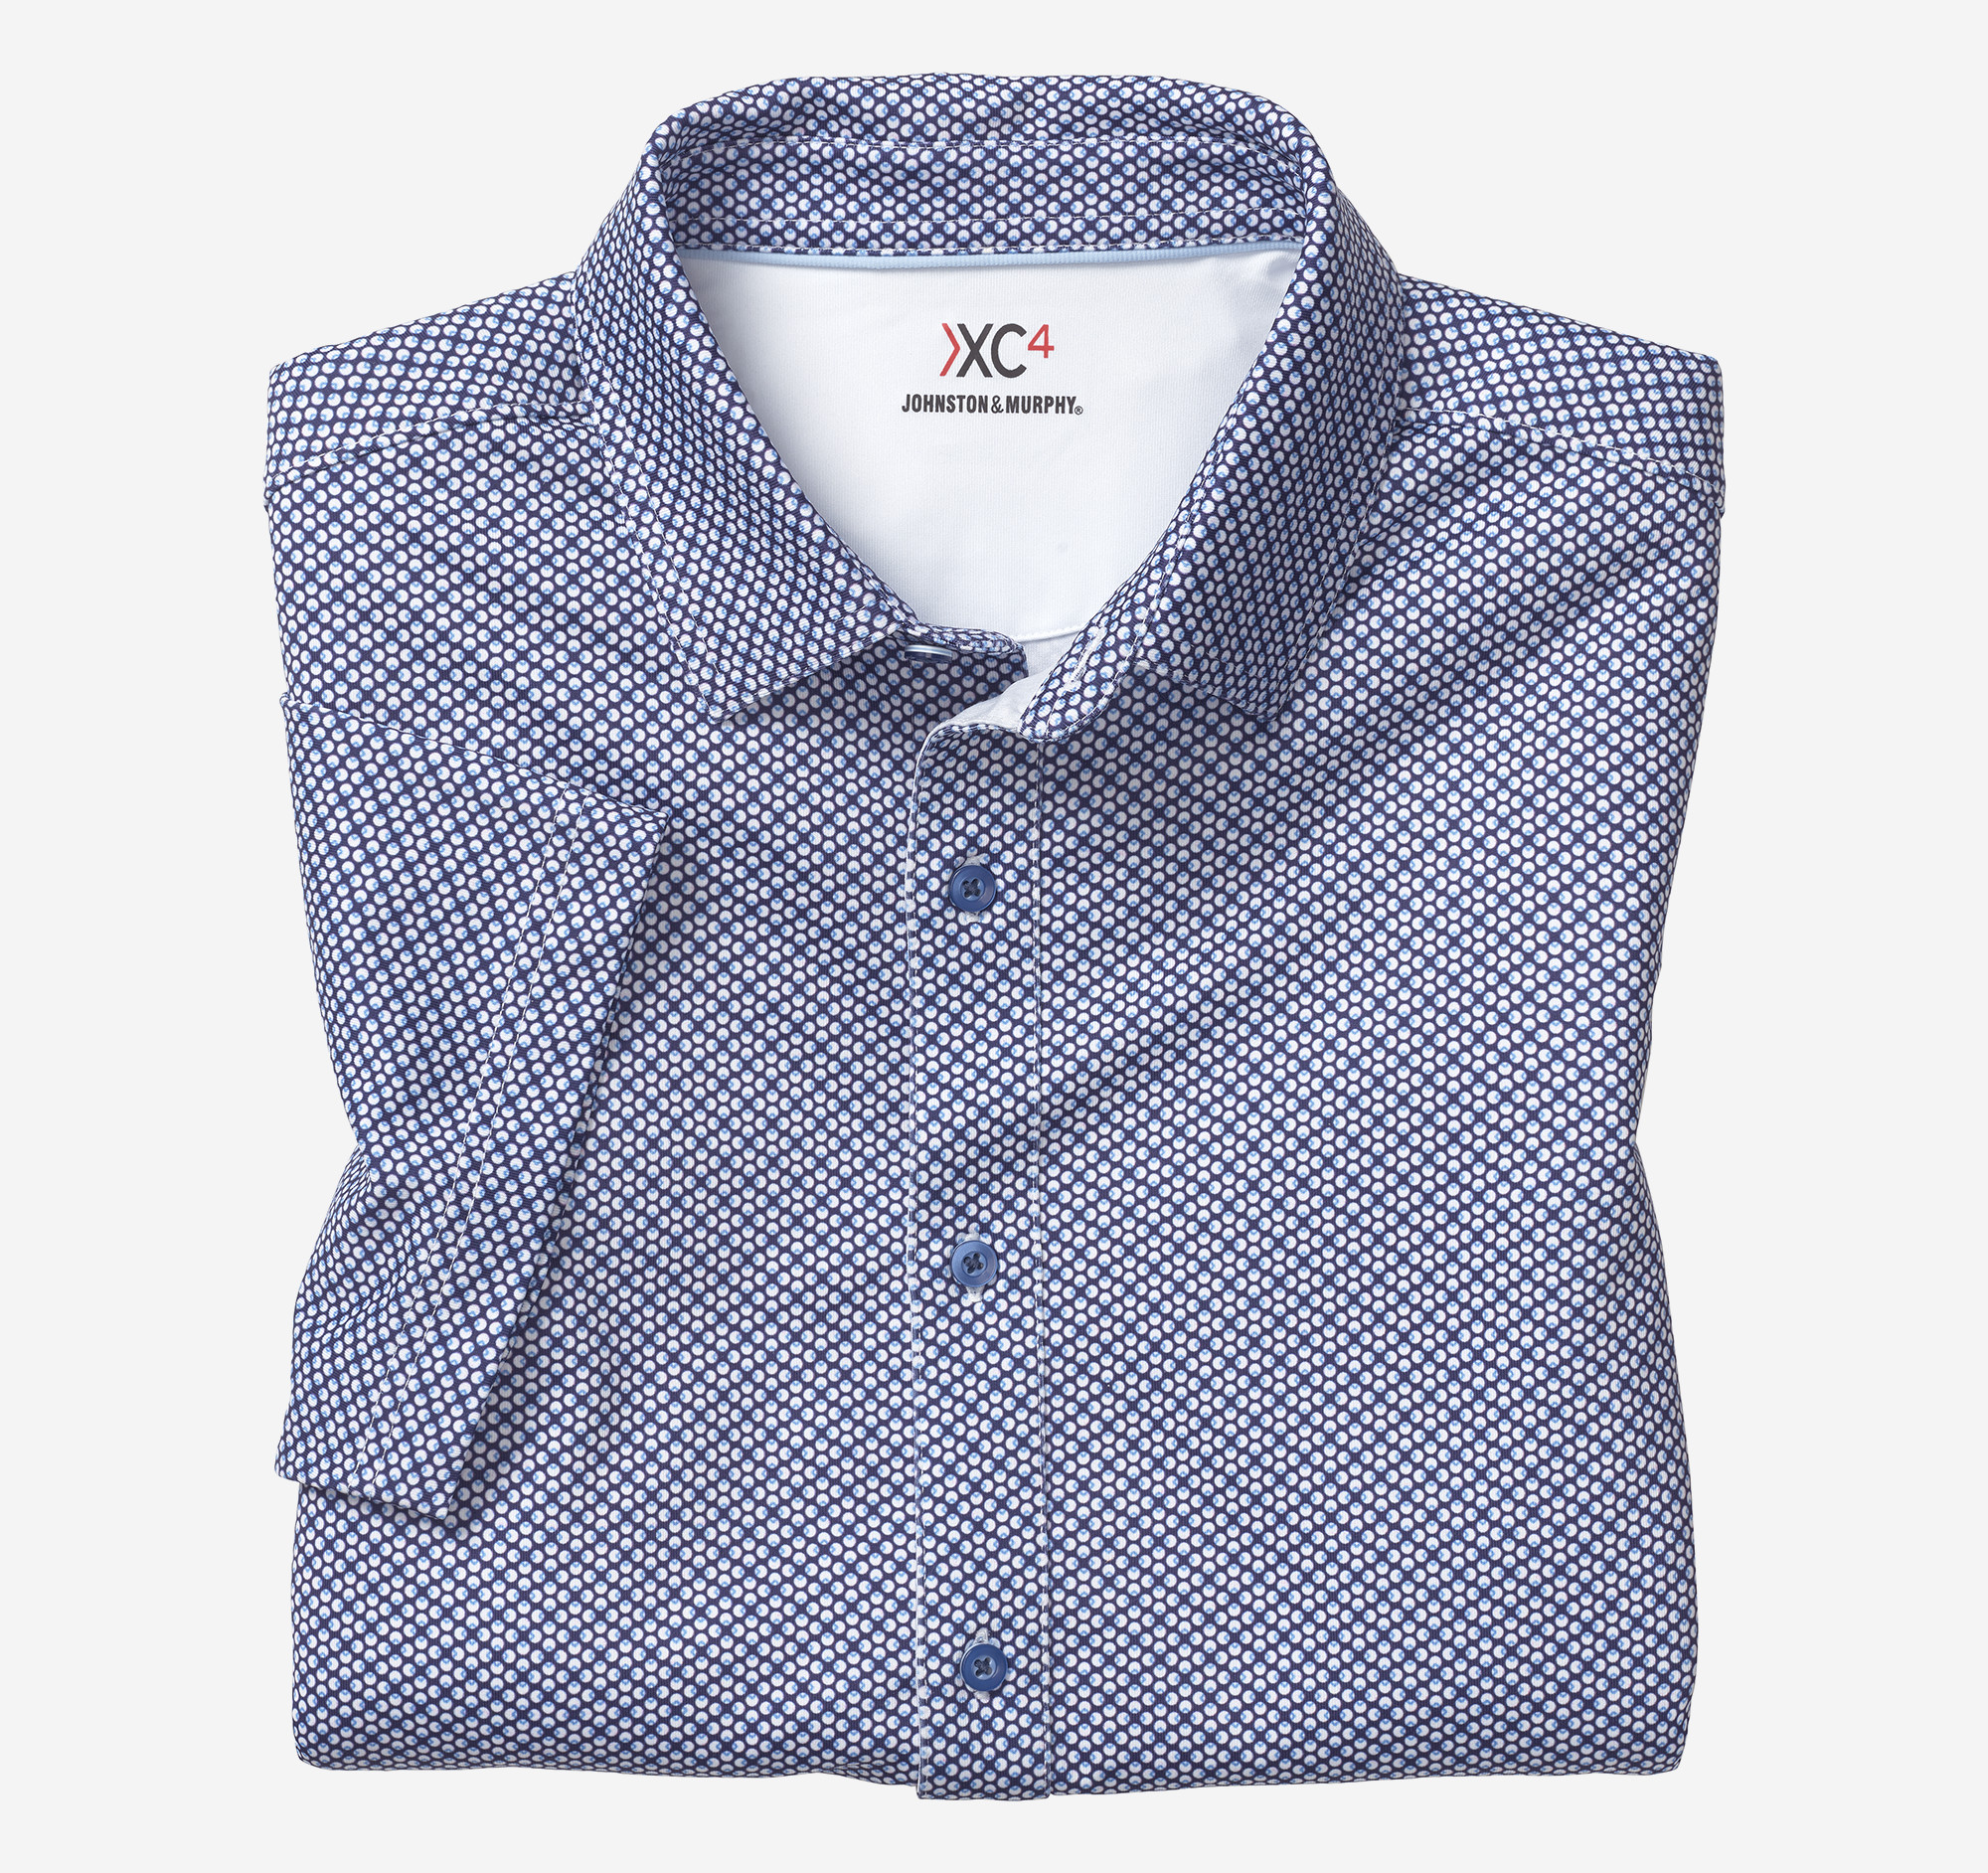 Image of Johnston & Murphy XC4 Performance Knit Button-Front Shirt